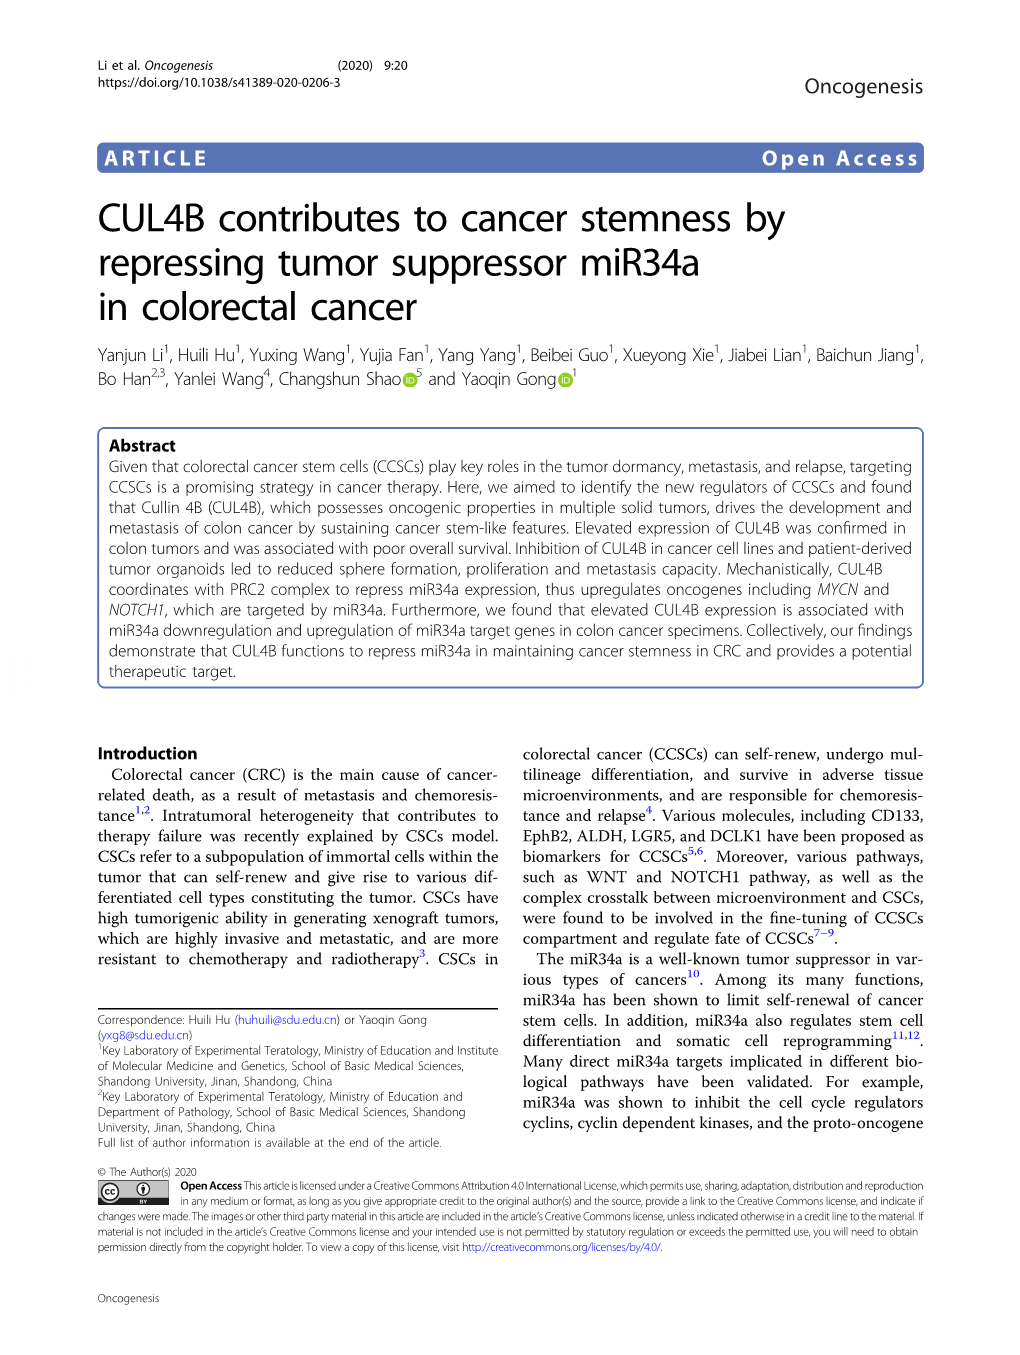 CUL4B Contributes to Cancer Stemness by Repressing Tumor